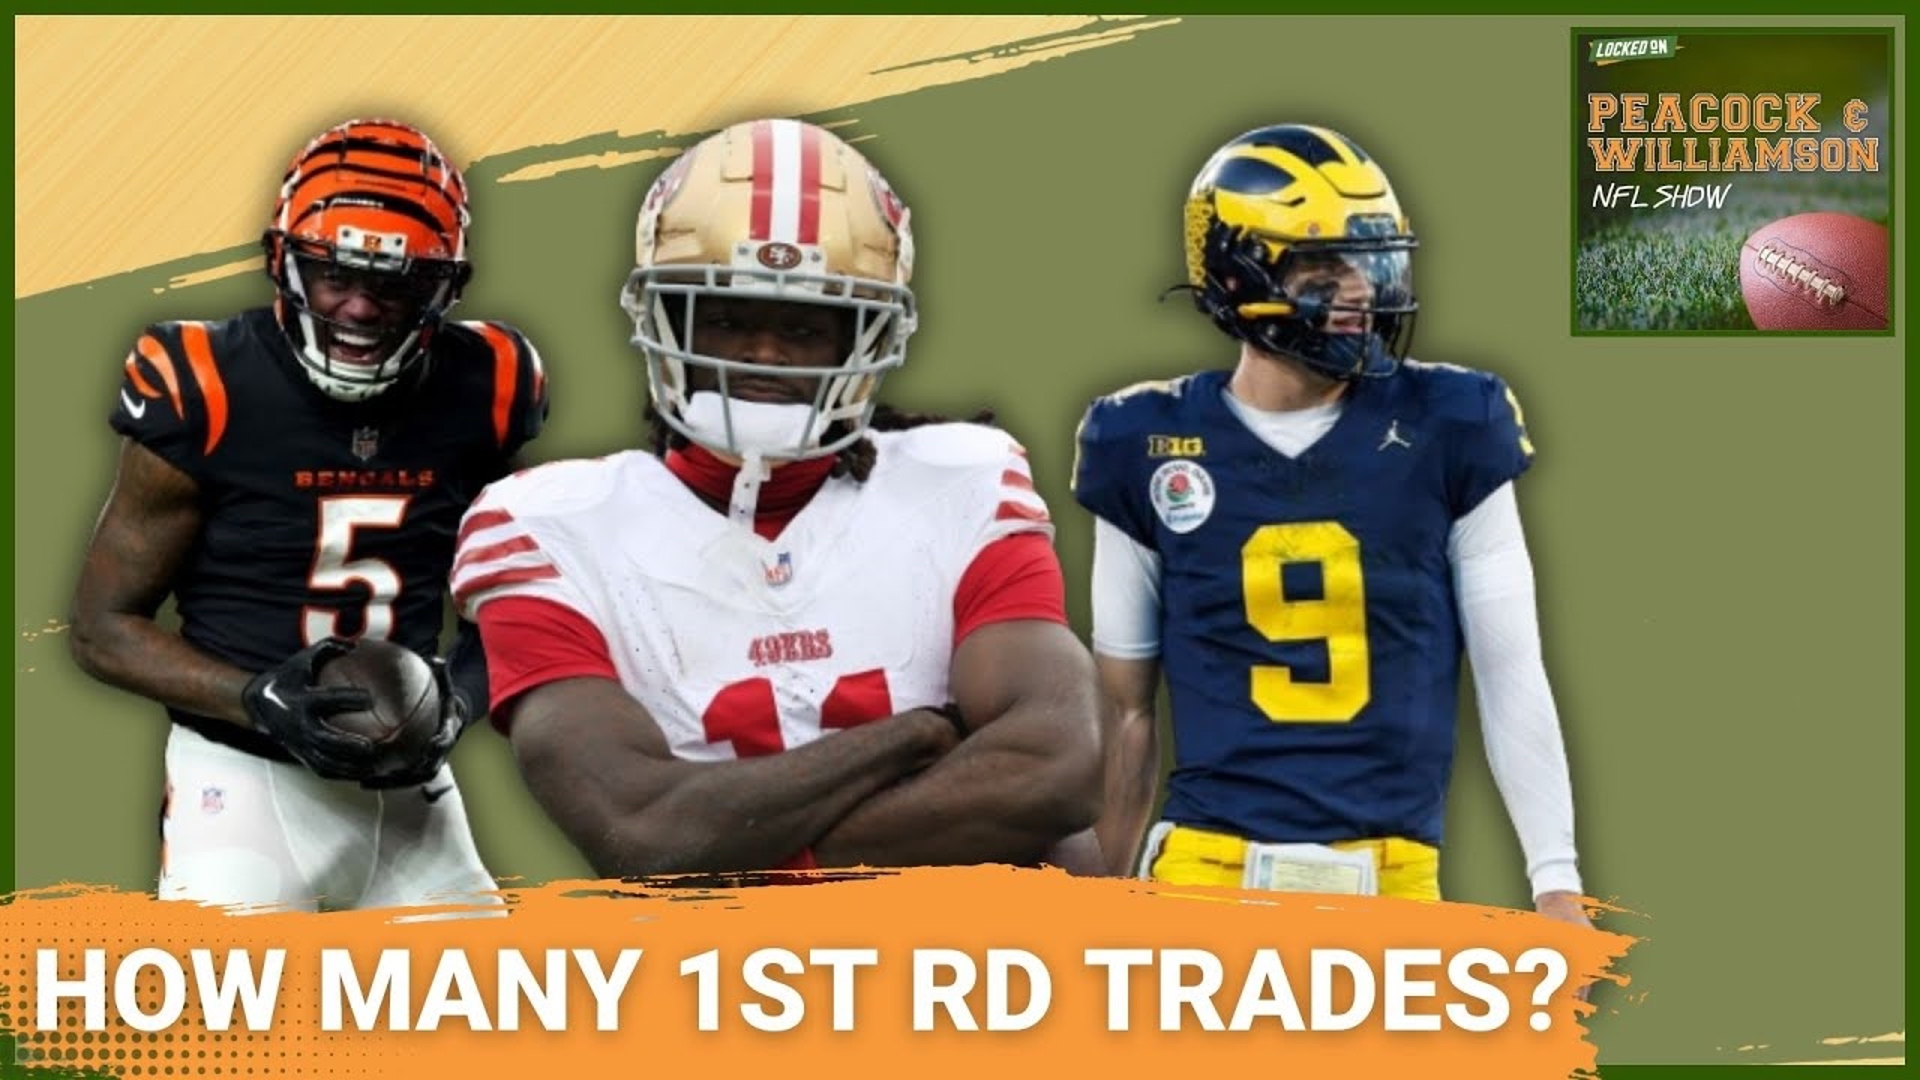 NFL Draft-Eve live chat with question on over/under 4.5 trades in the first round, Brandon Aiyuk, Tee Higgins and Trey Hendrickson trades and more.